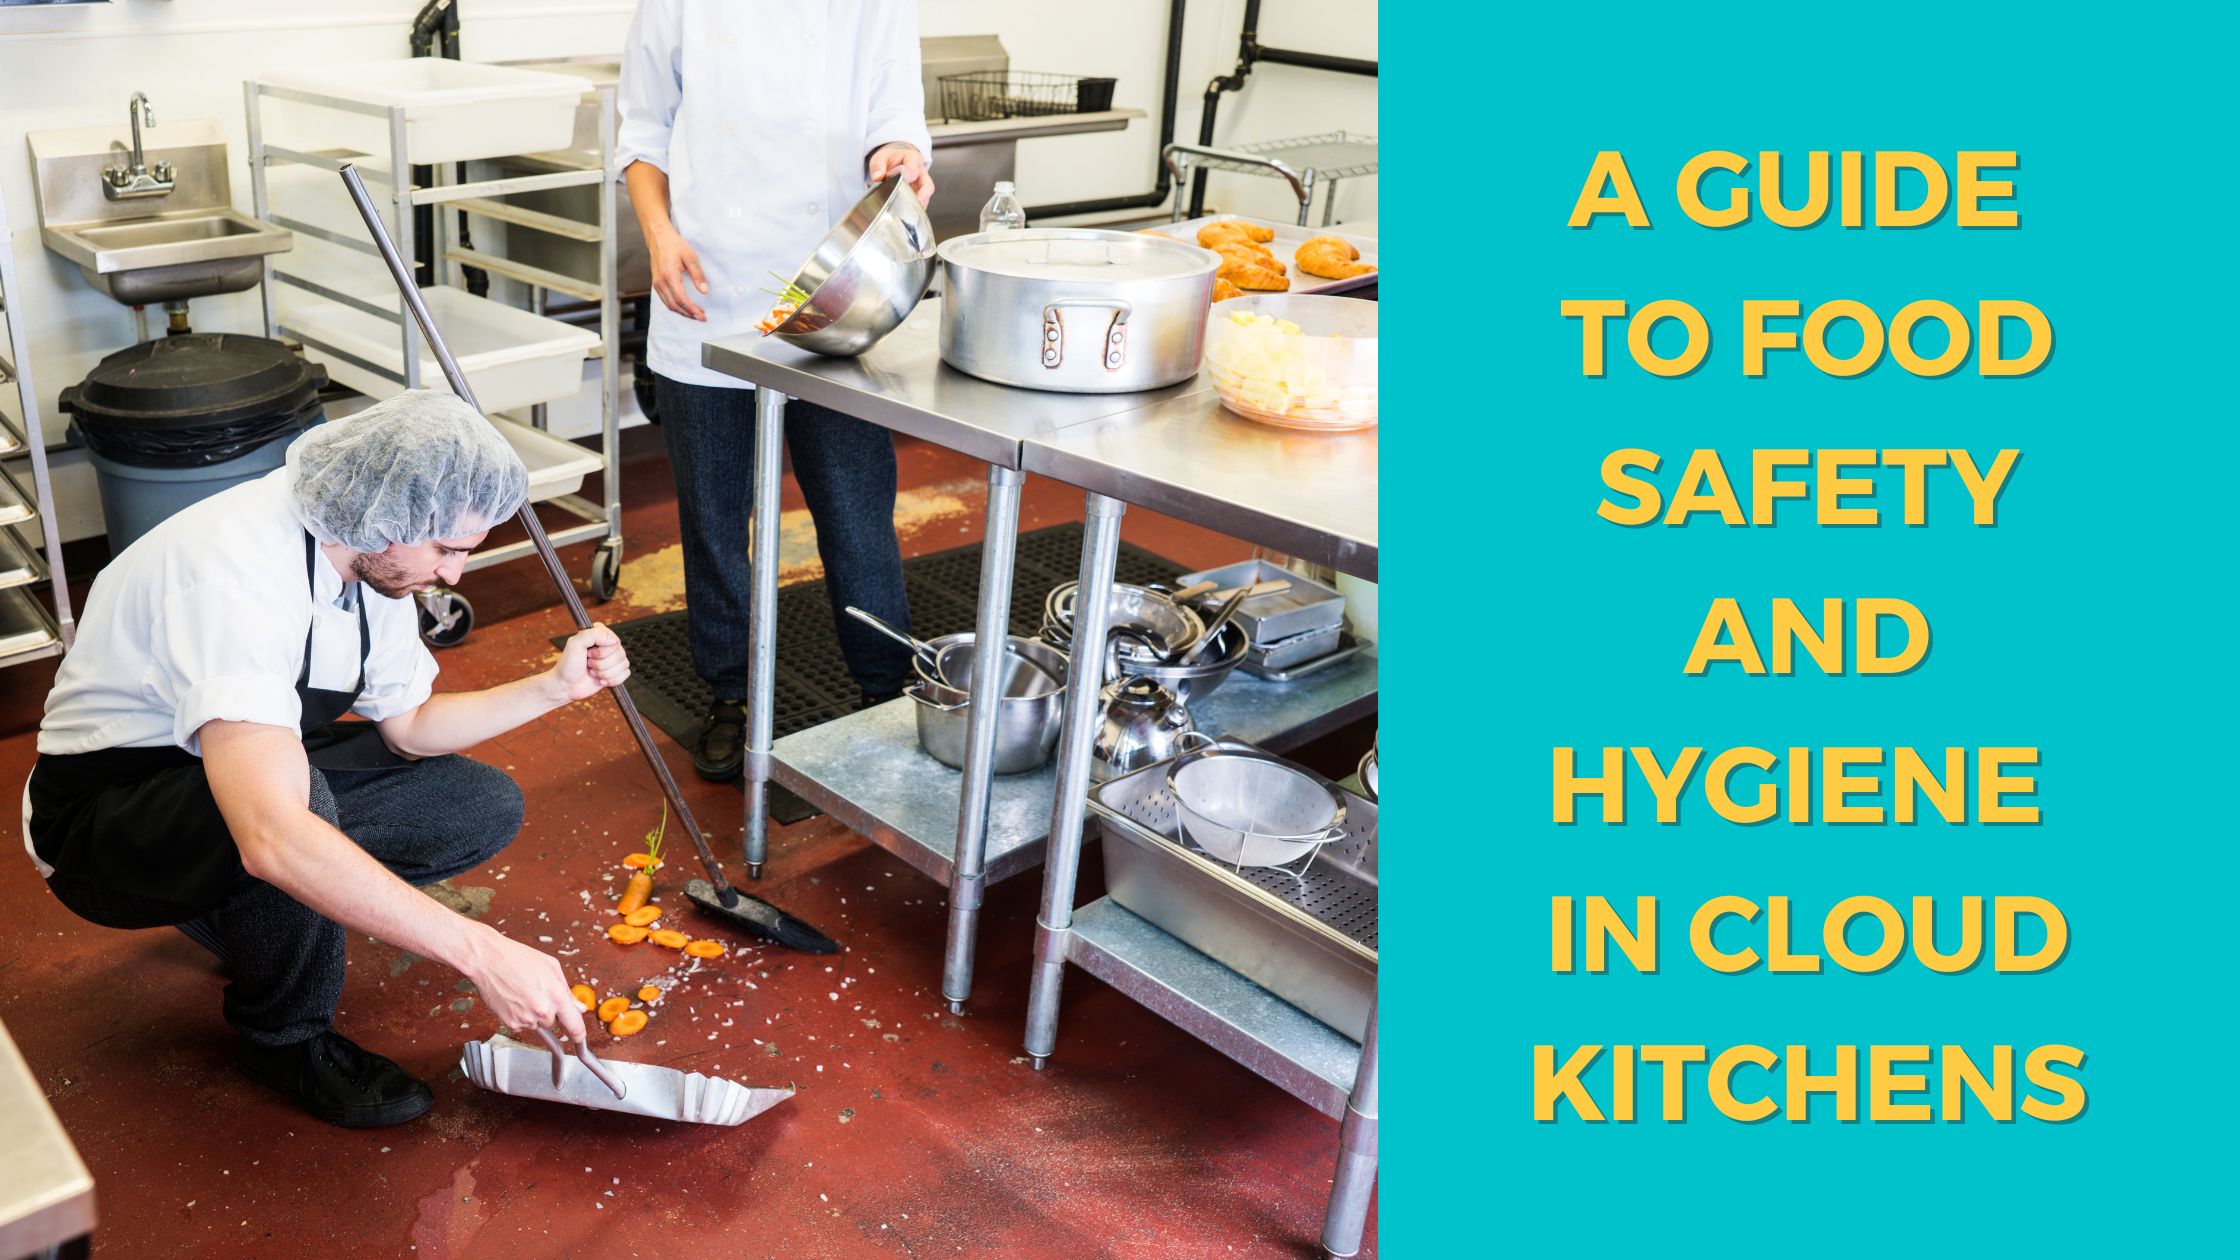 A Guide to Food Safety and Hygiene in Cloud Kitchens